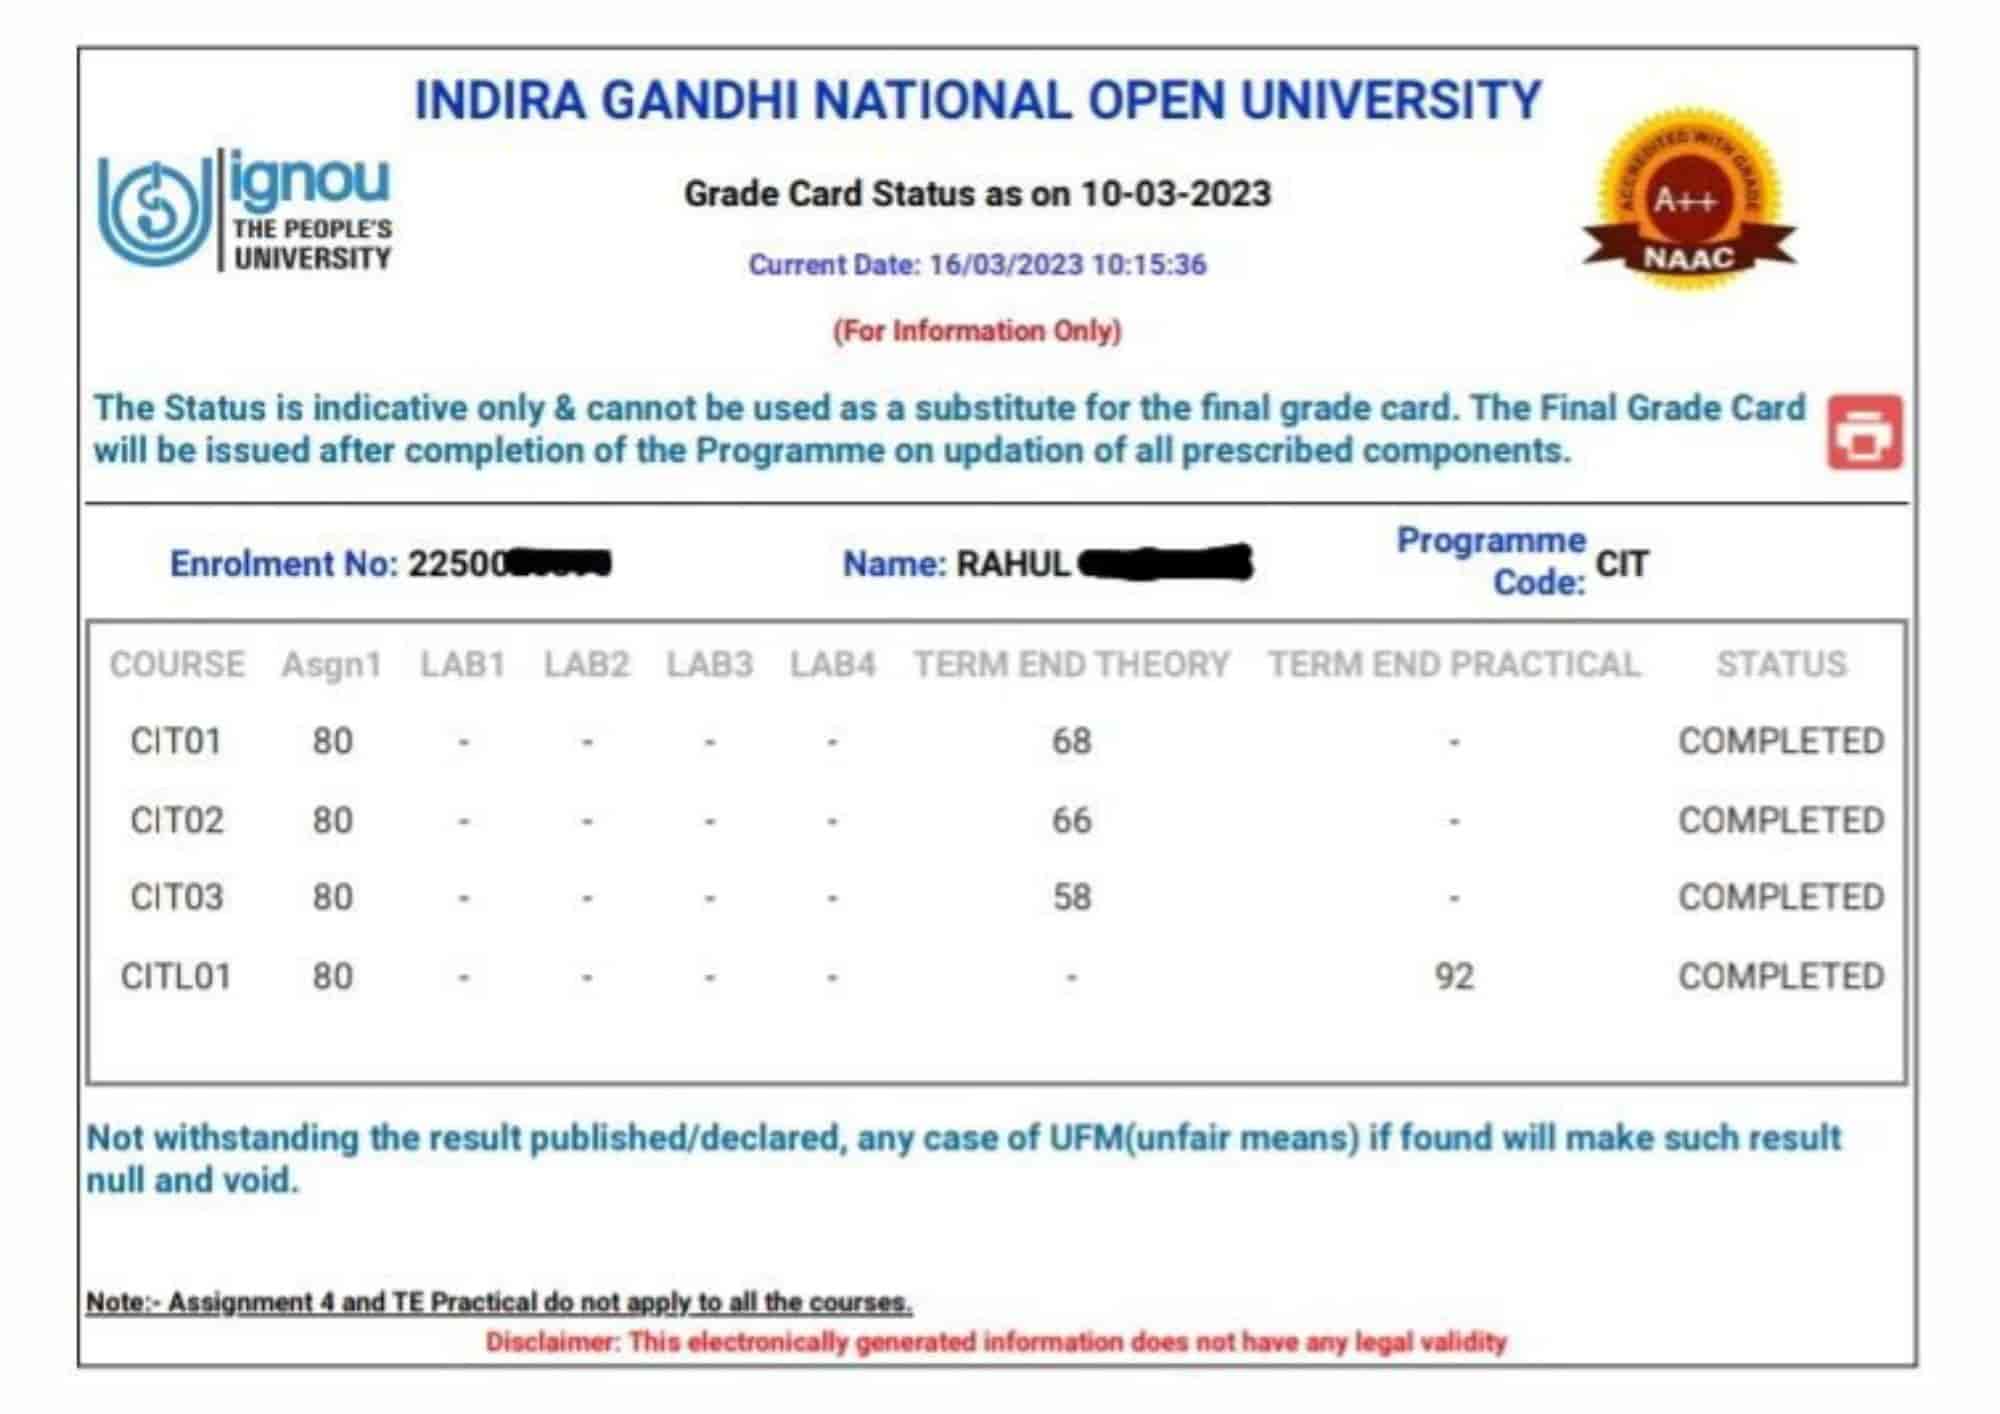 Certification in Information Technology - IGNOU